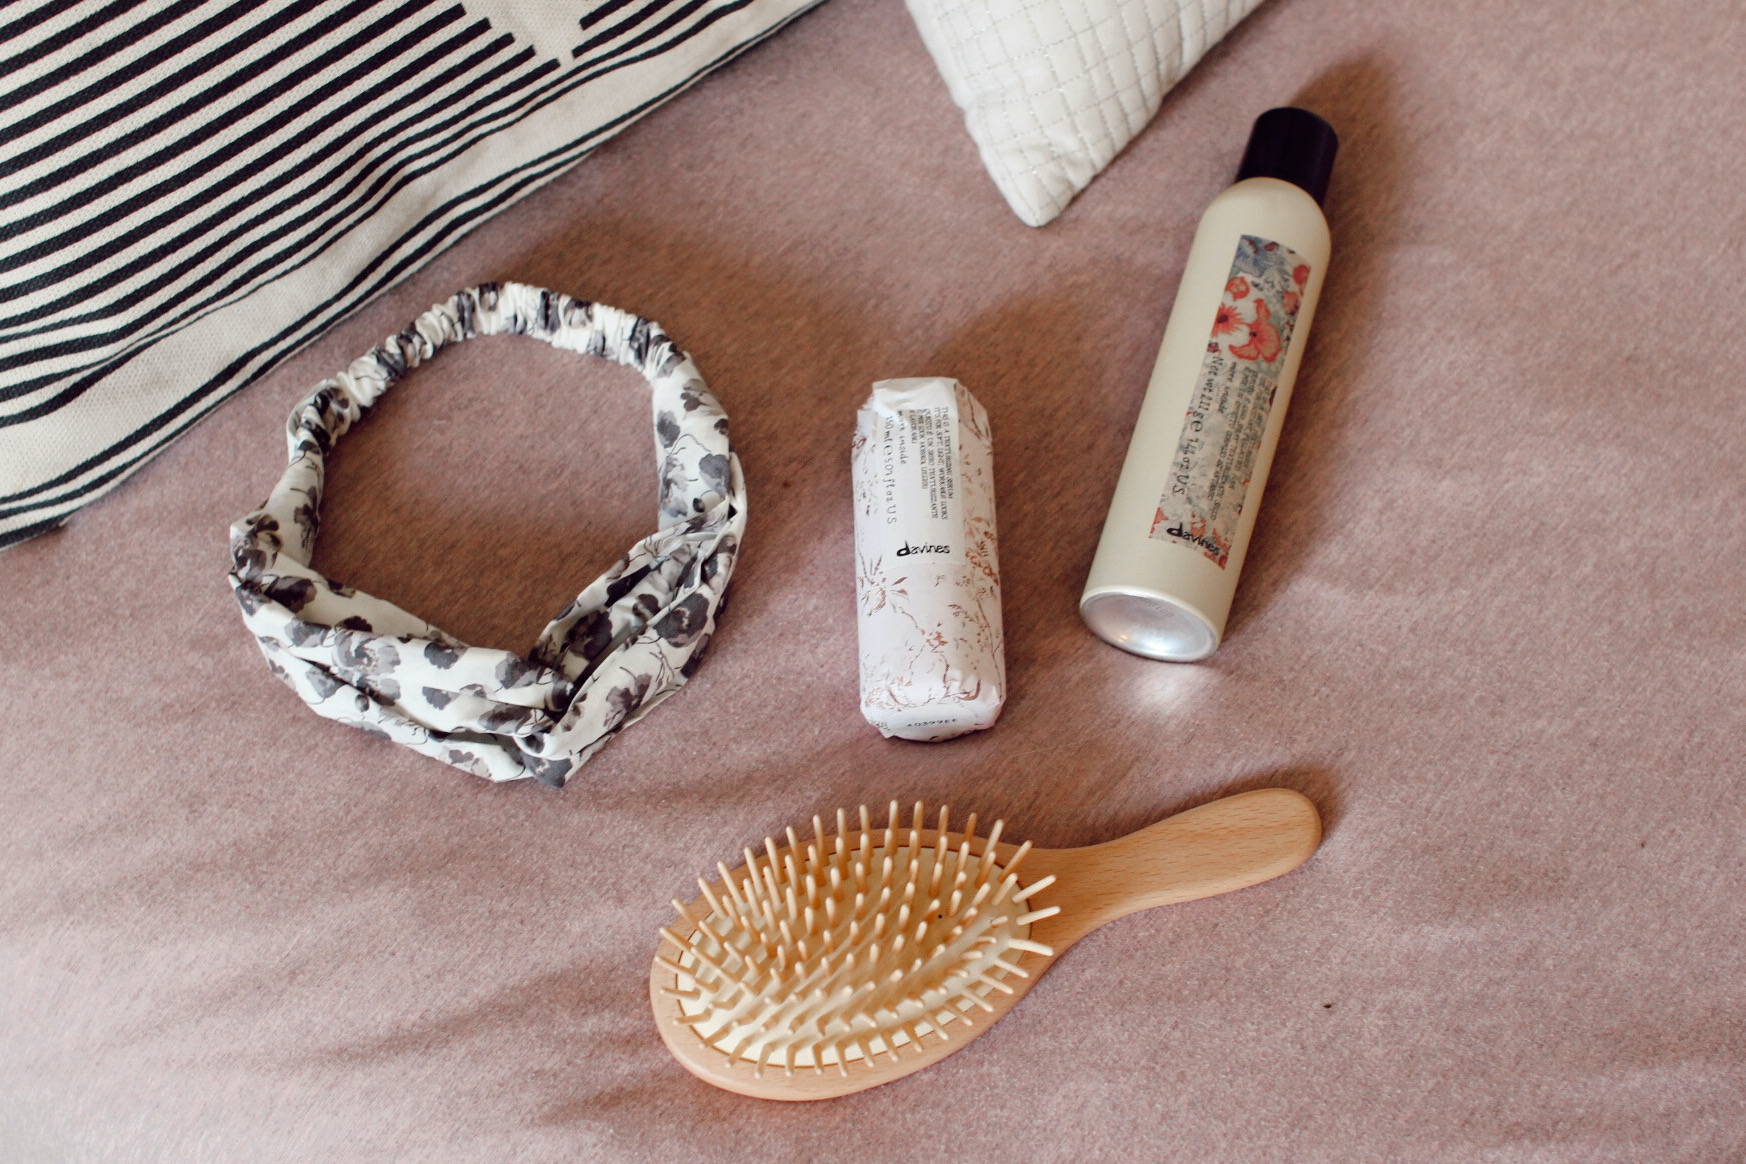 Davines headband and styling products